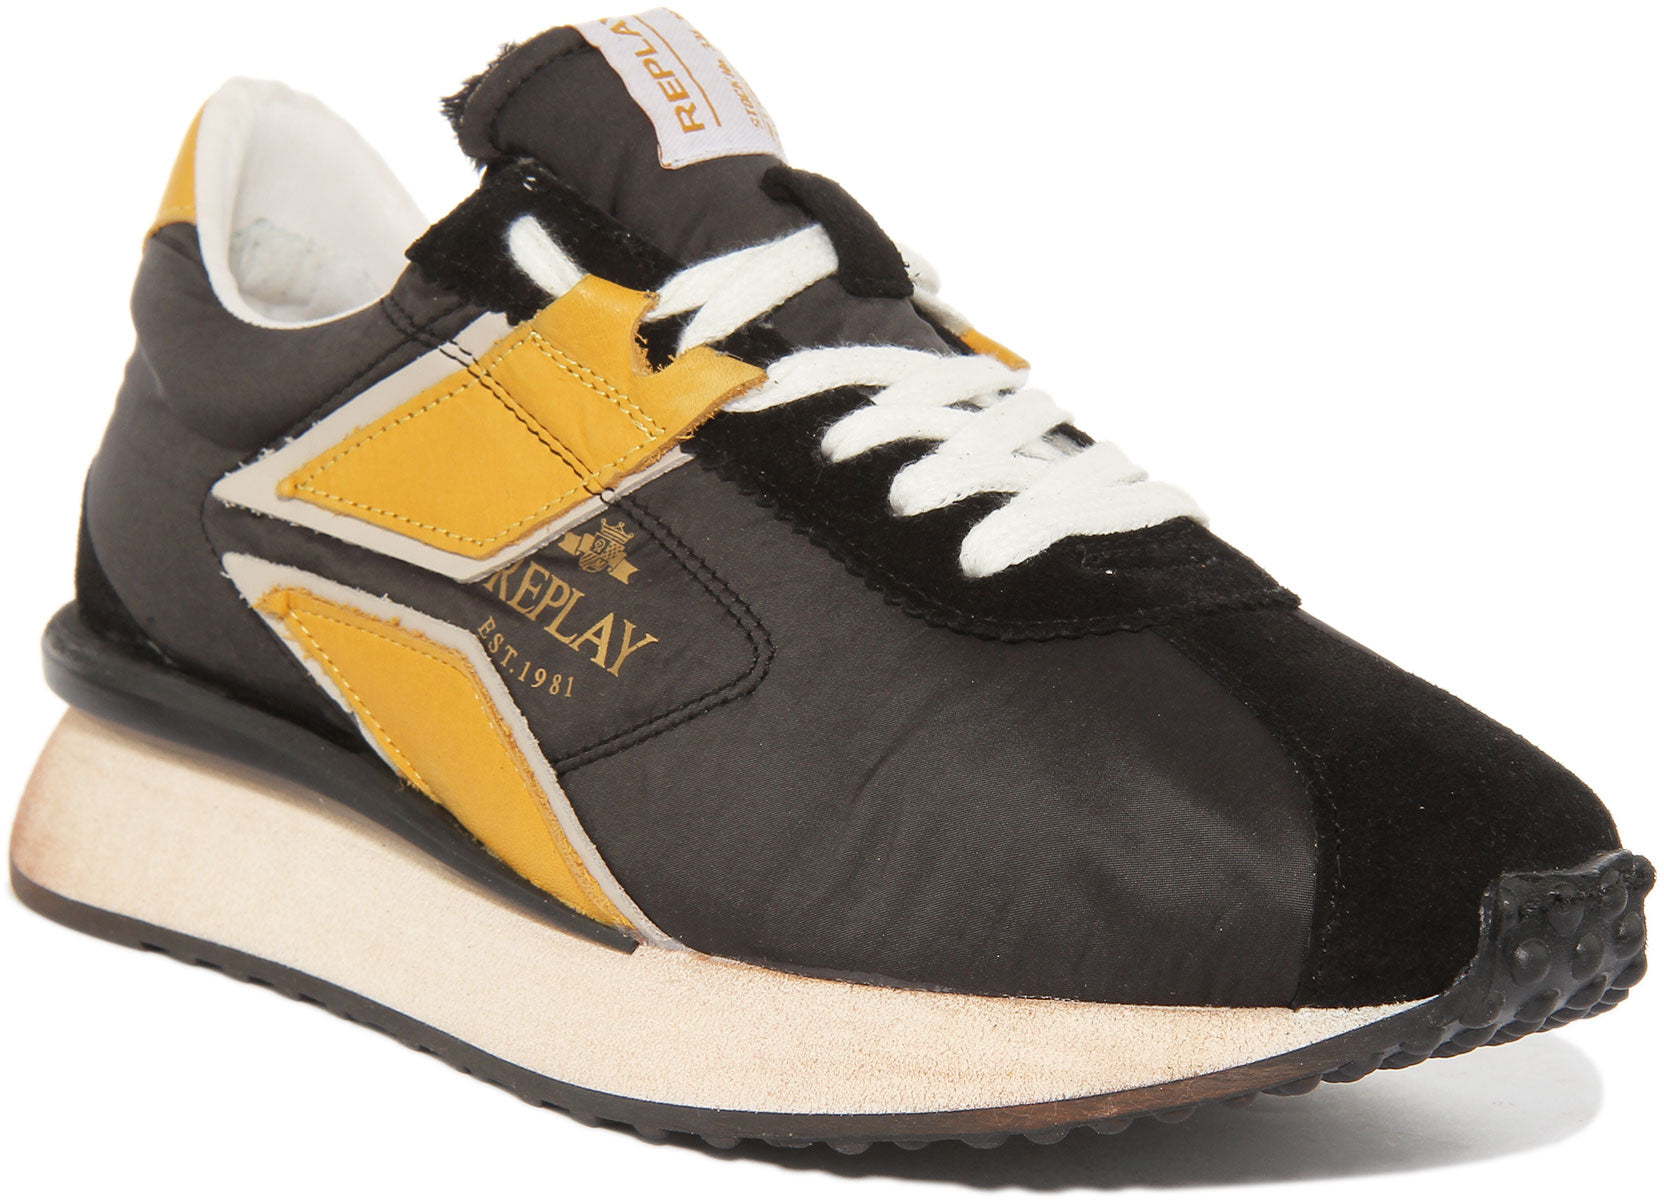 REPLAY 1981 Brand Black Leather Low Top Sneakers Logo Size 10